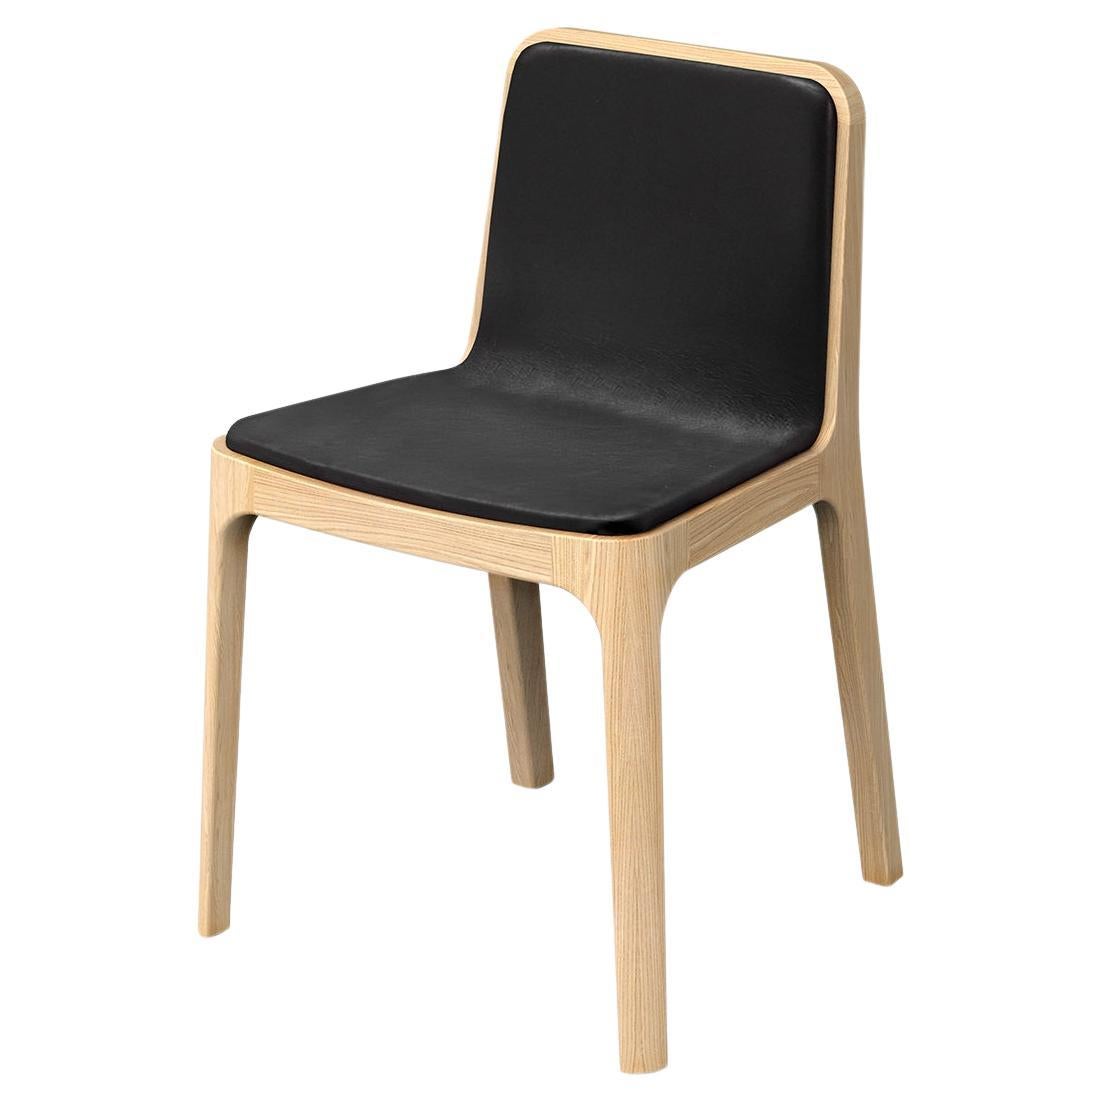 Minimalist Modern Chair in Ash Wood Leather Upholstery